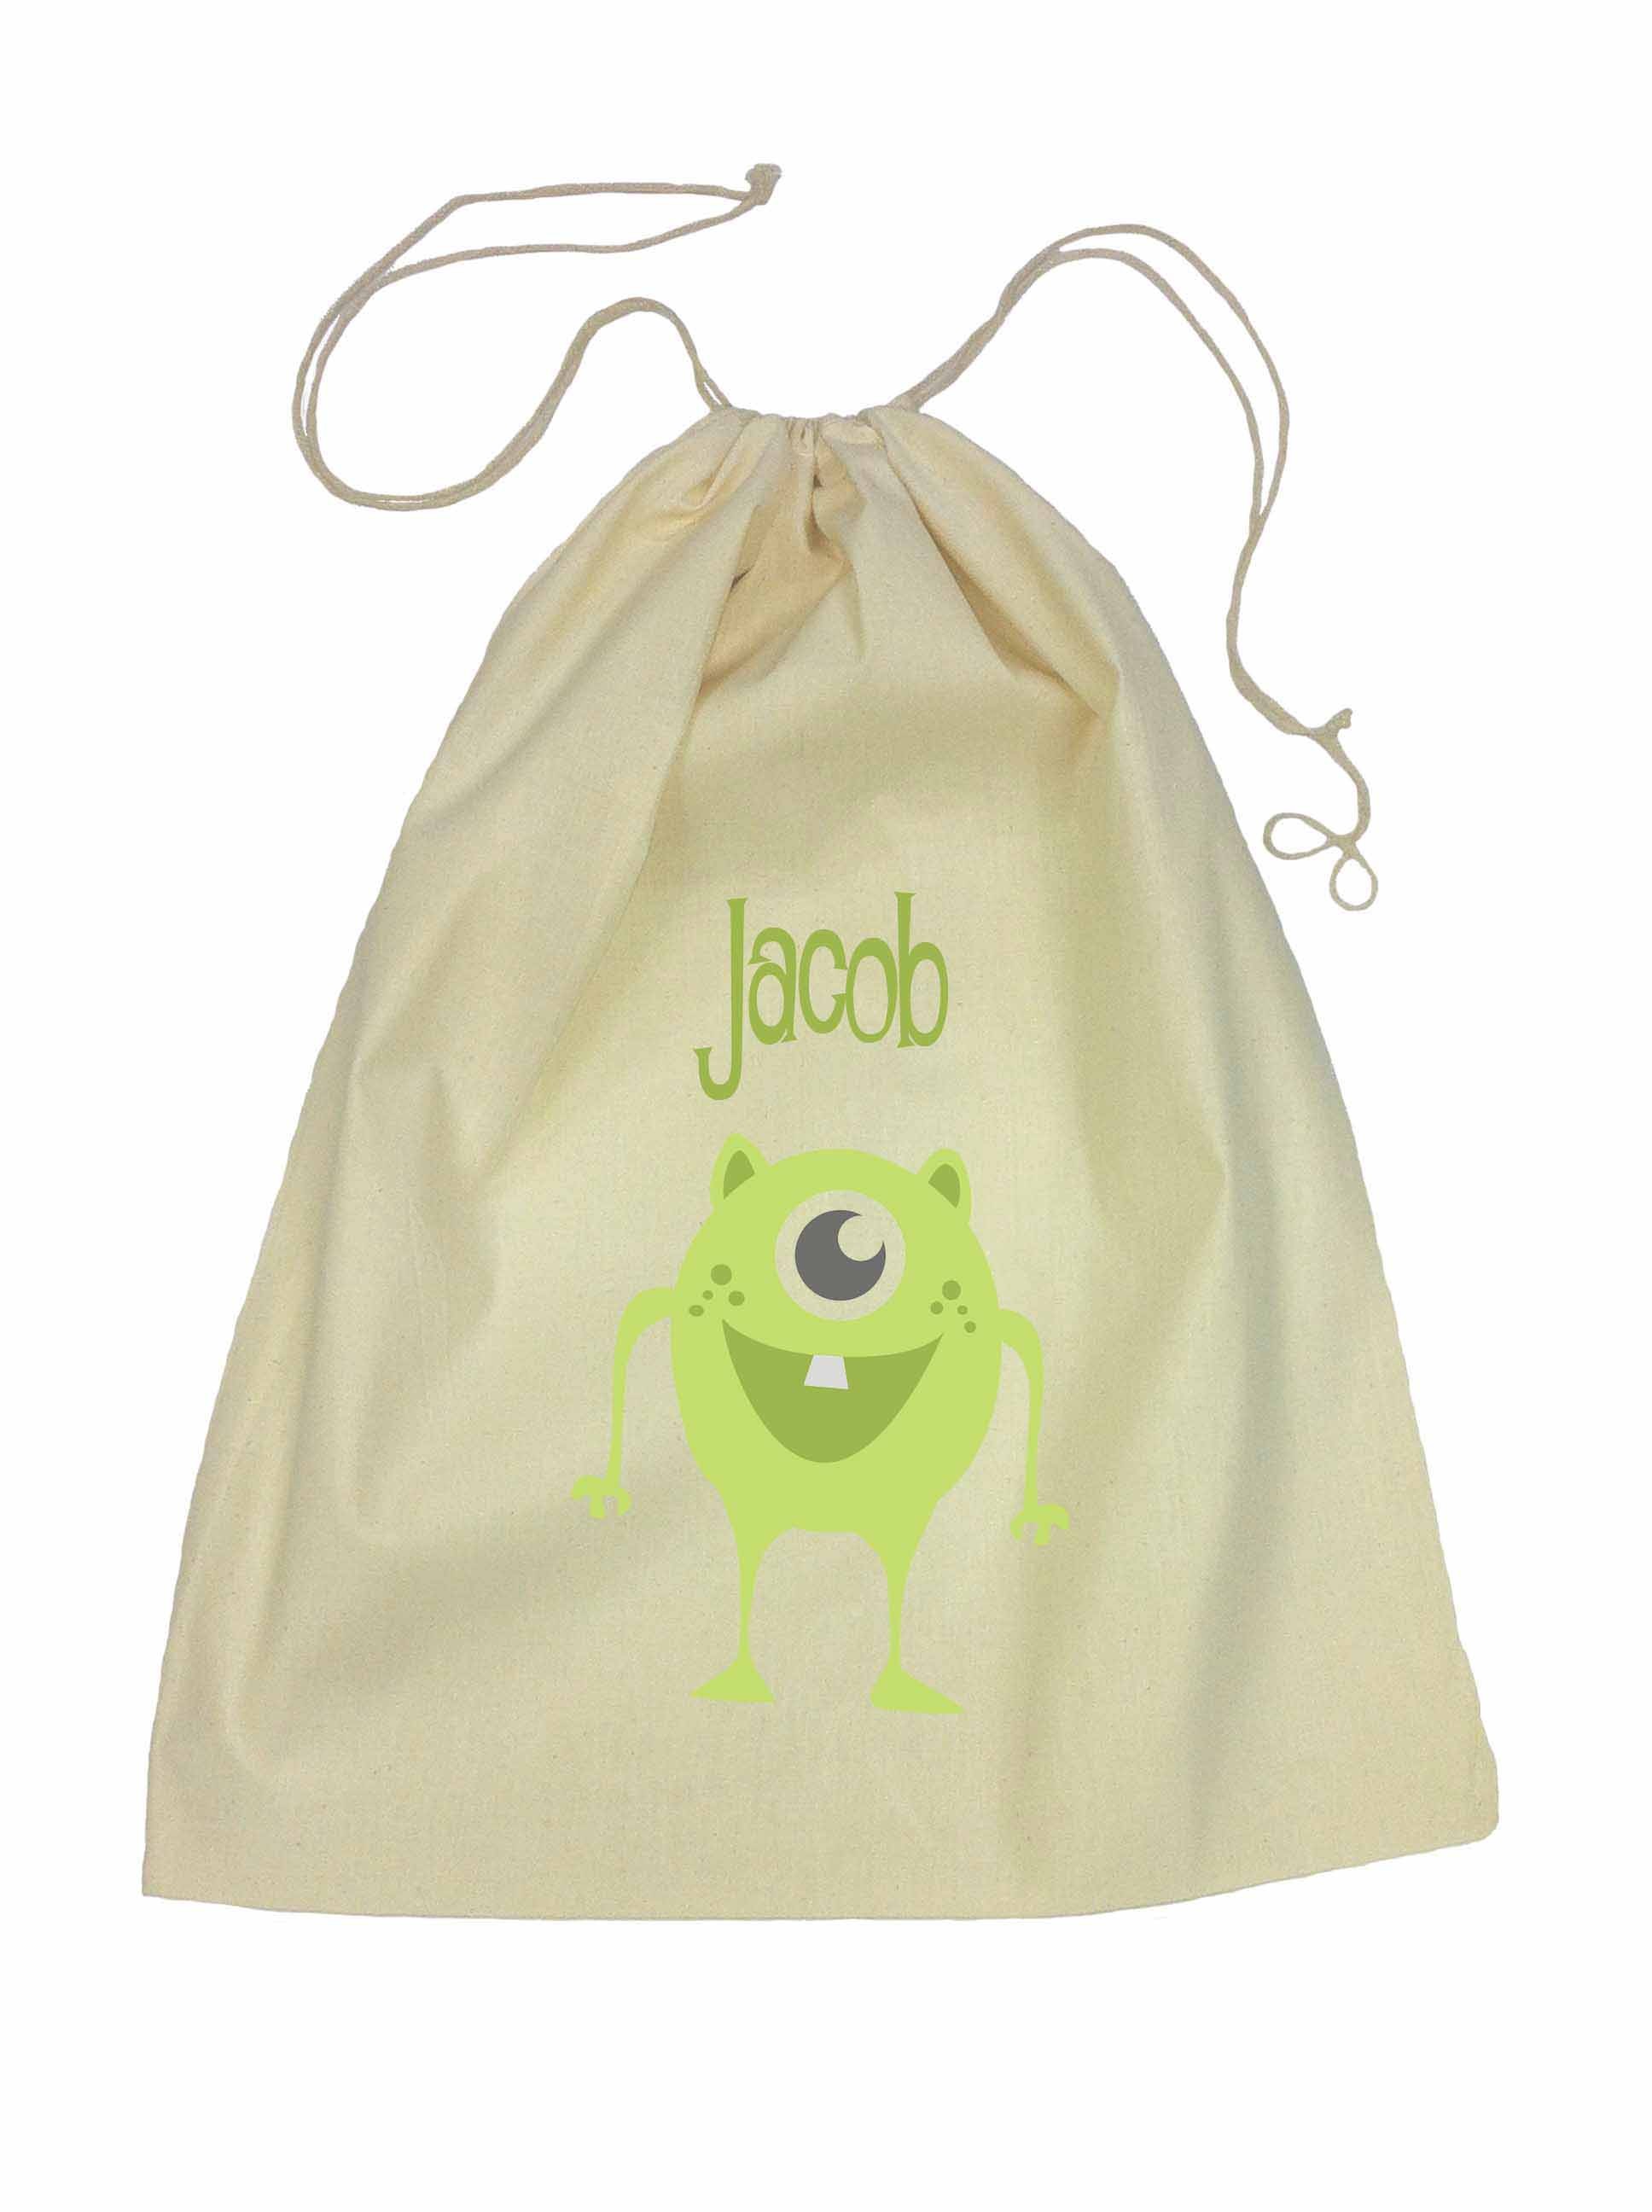 Drawstring Library Bag with Green Alien